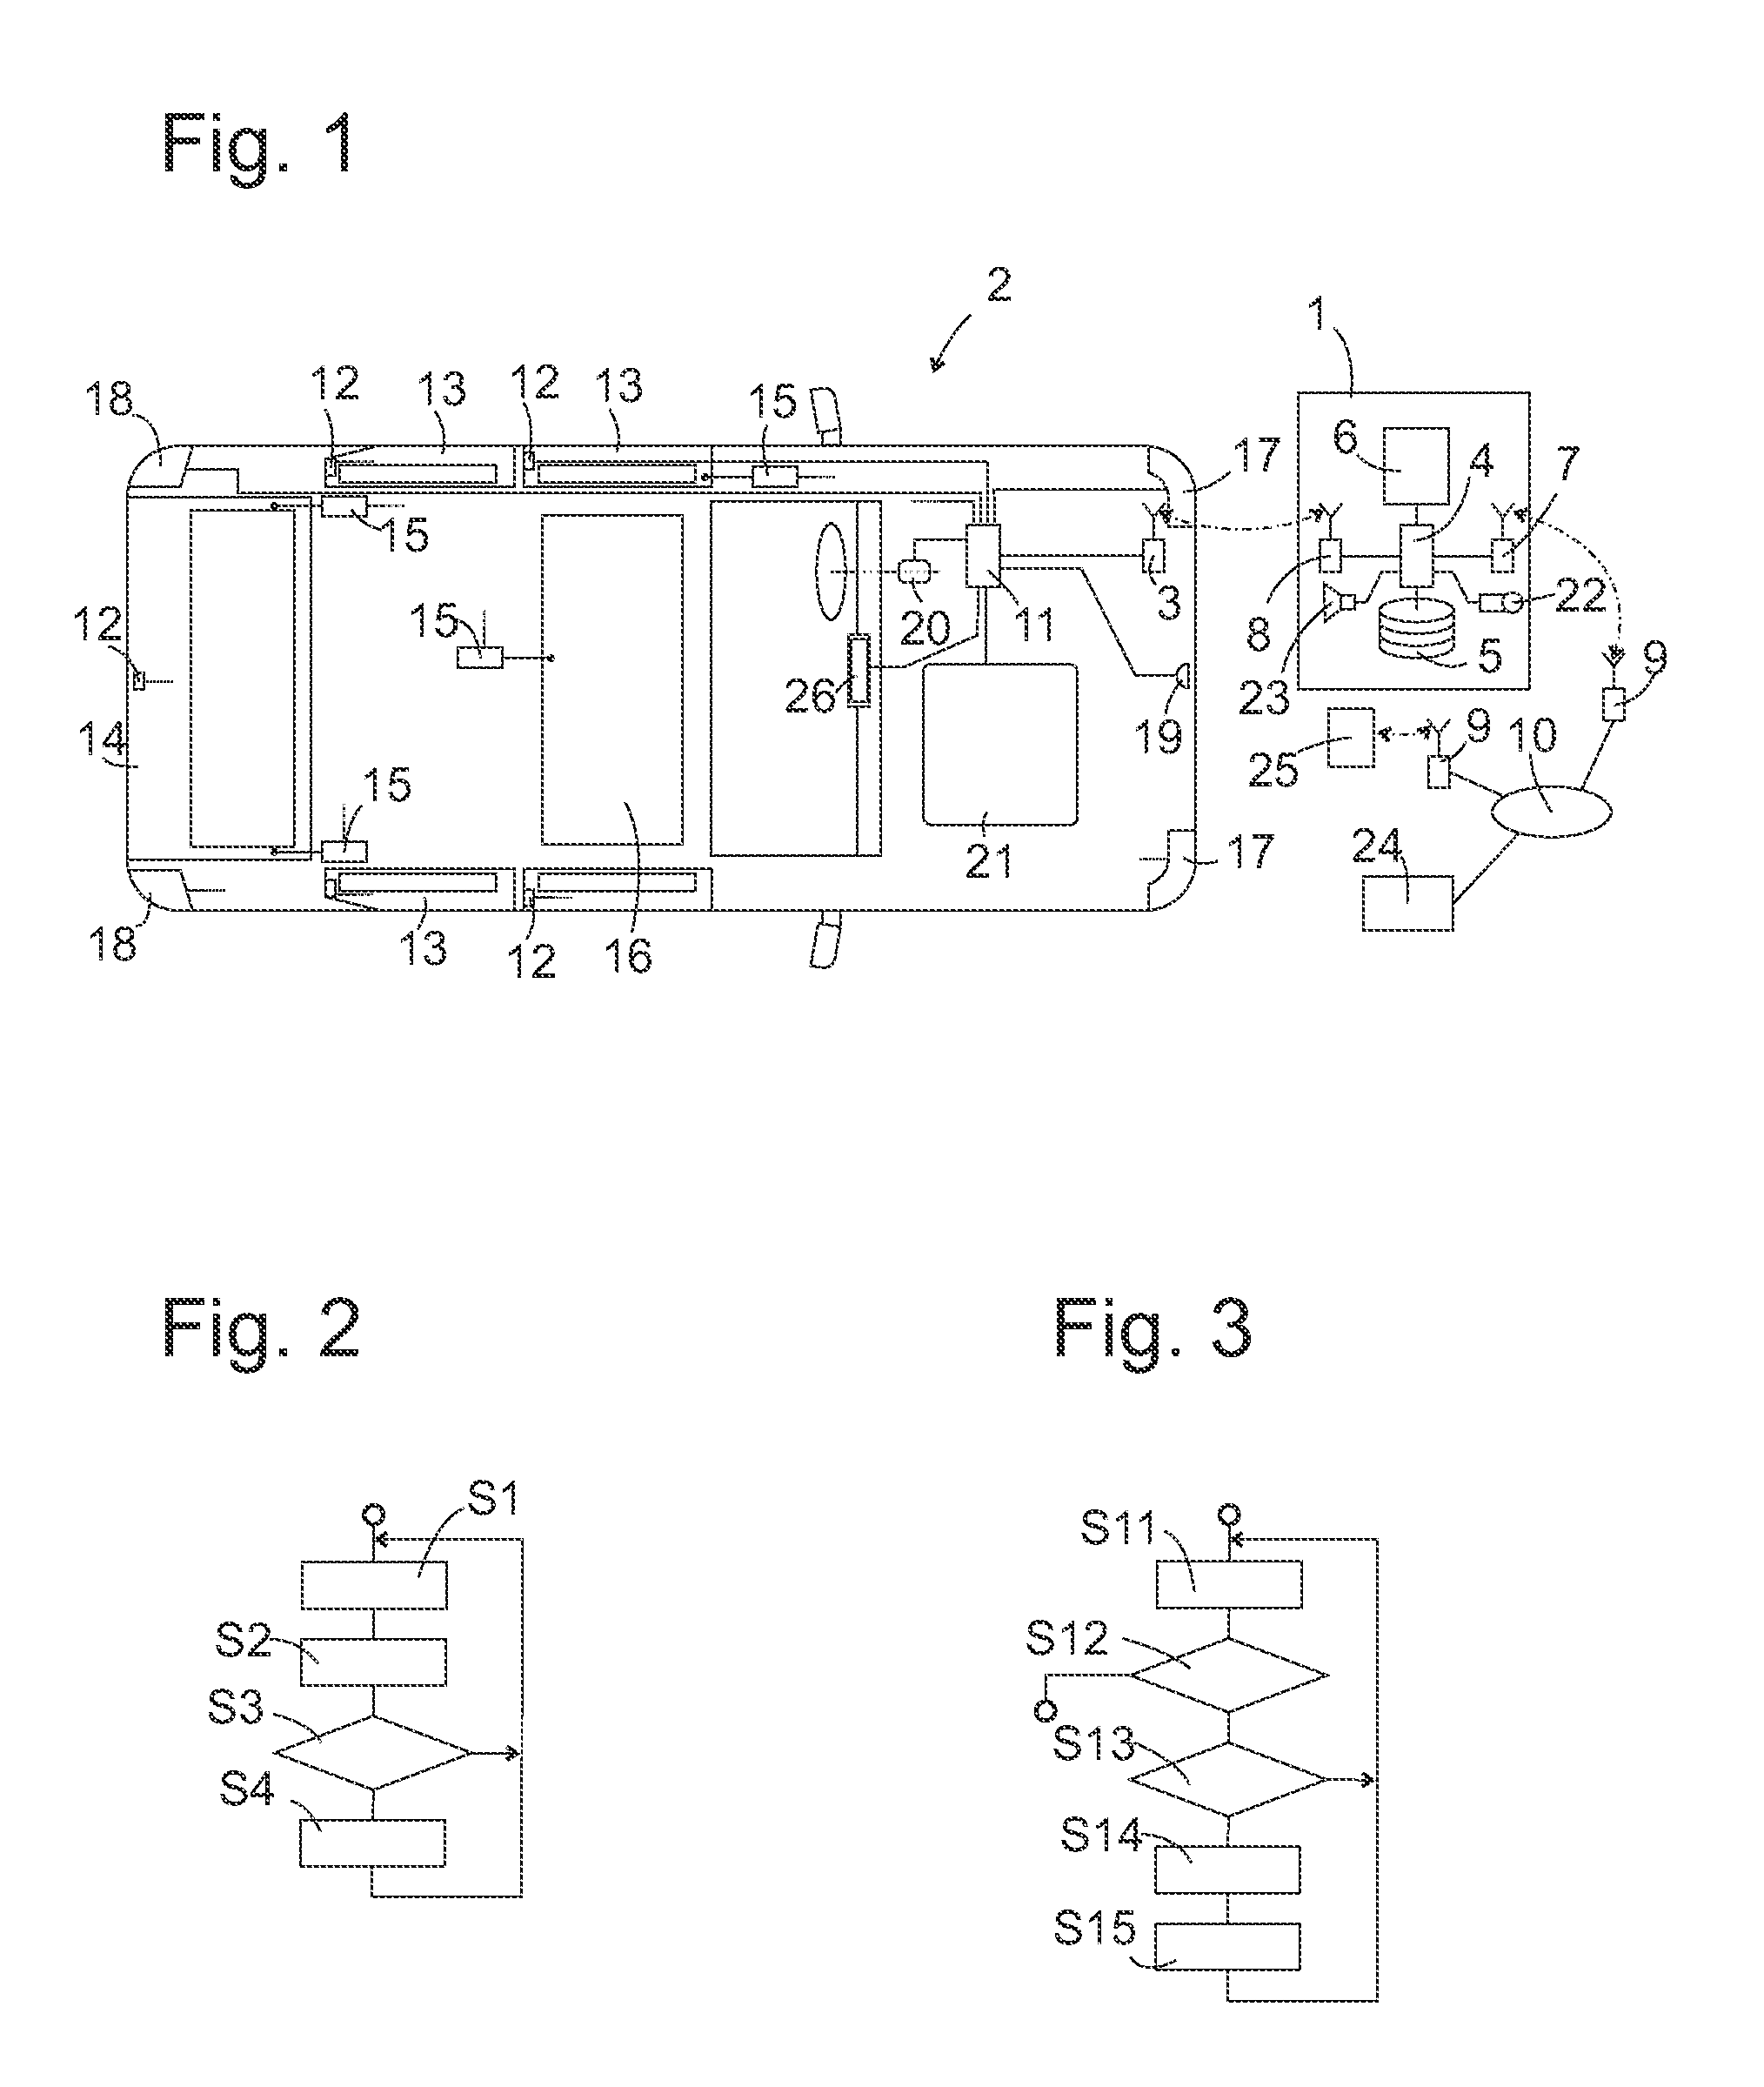 System for controlling functions of a vehicle by speech